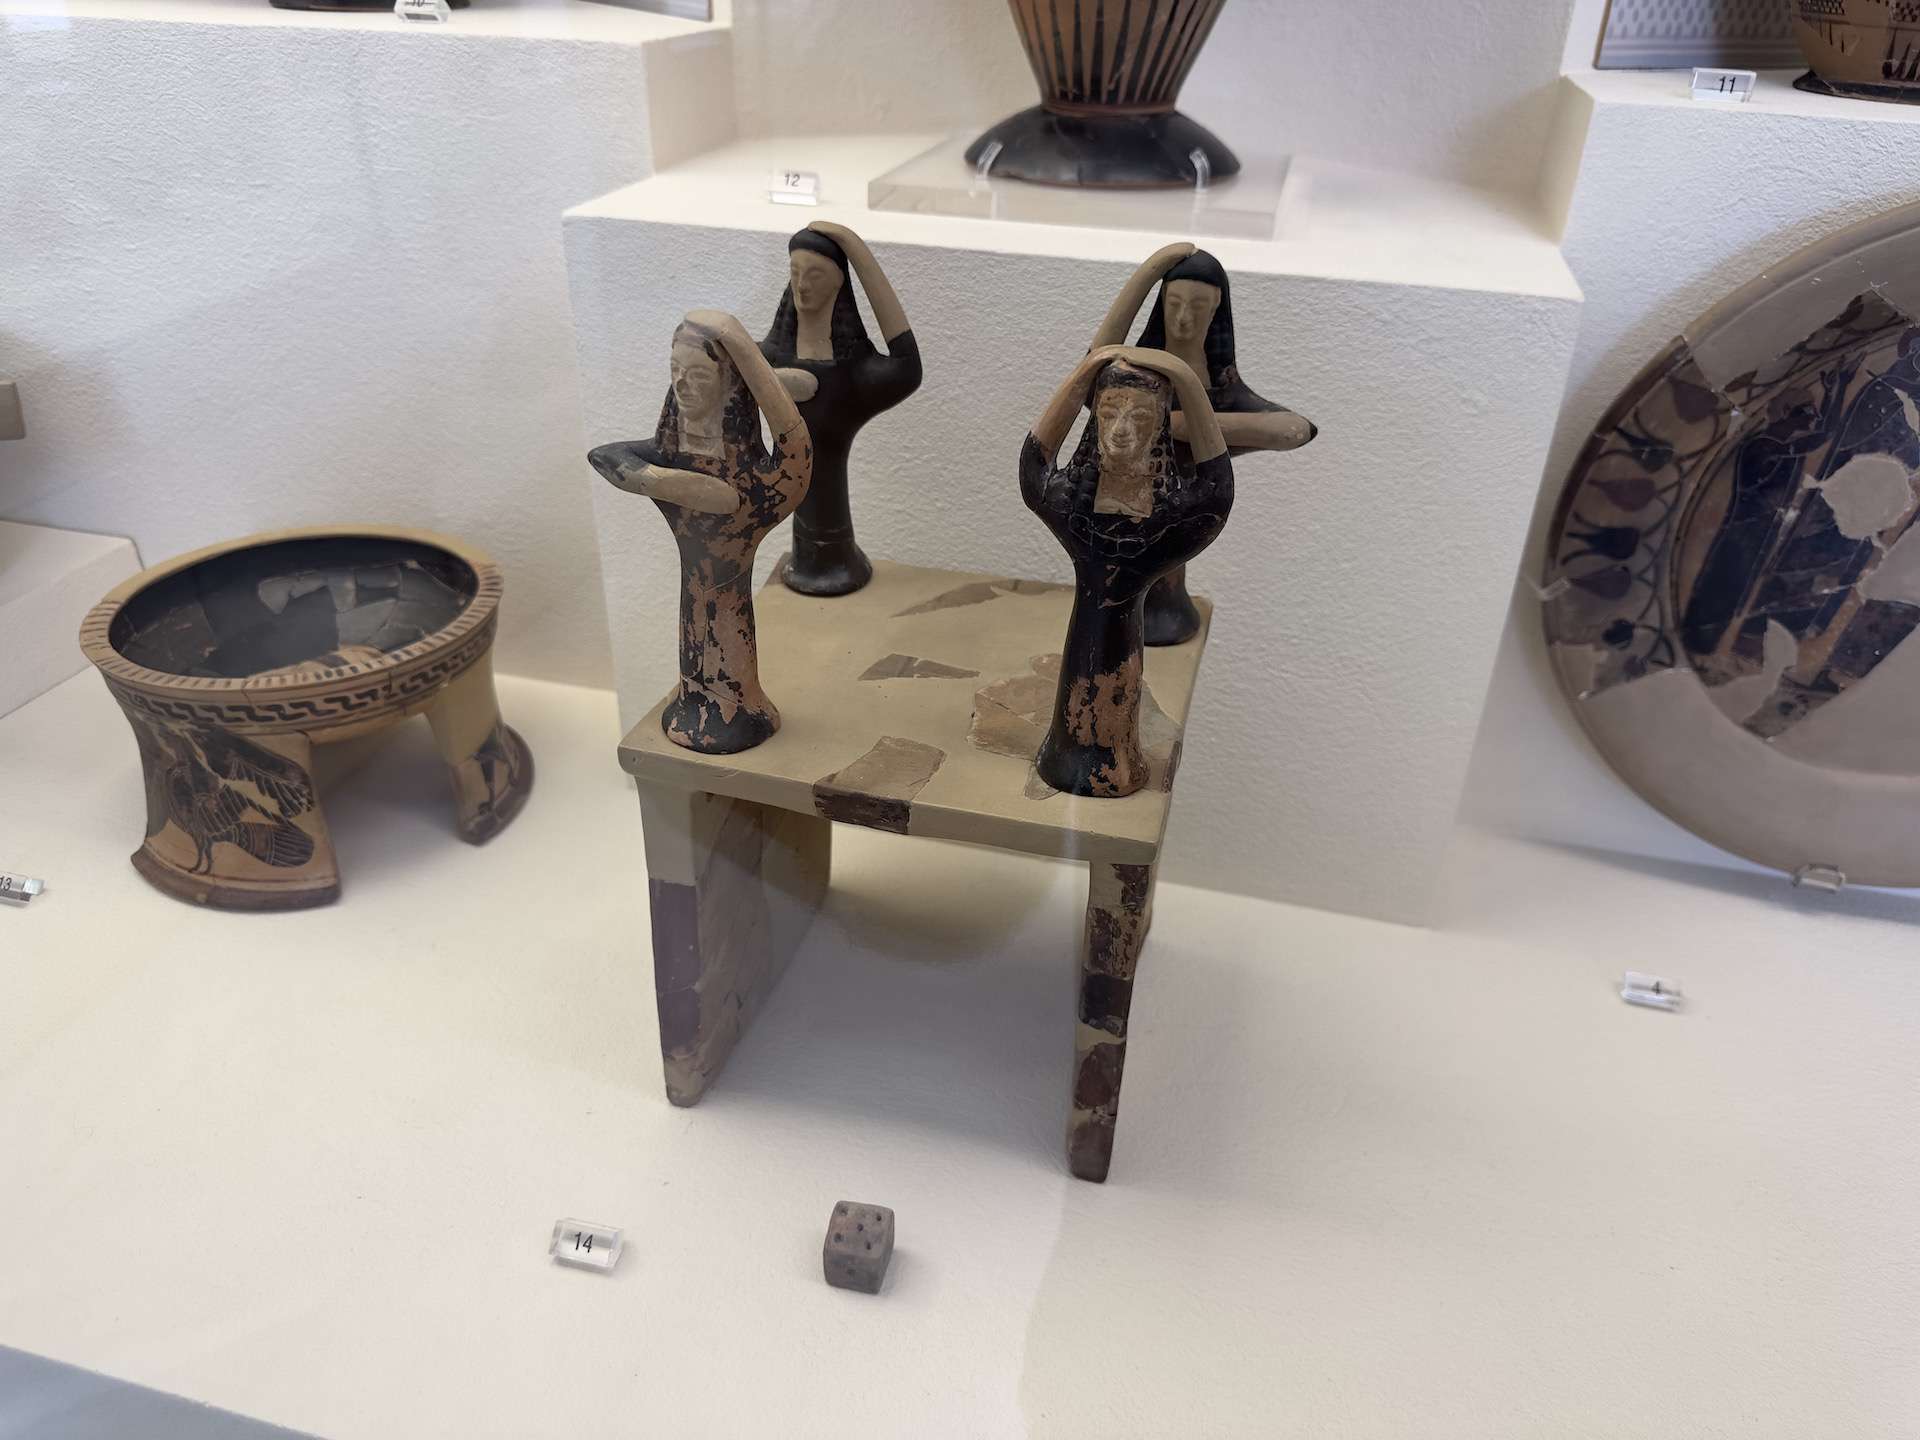 Miniature gaming table with four figurines of mourners and dice; c. 580 BC at the Kerameikos Museum in Athens, Greece